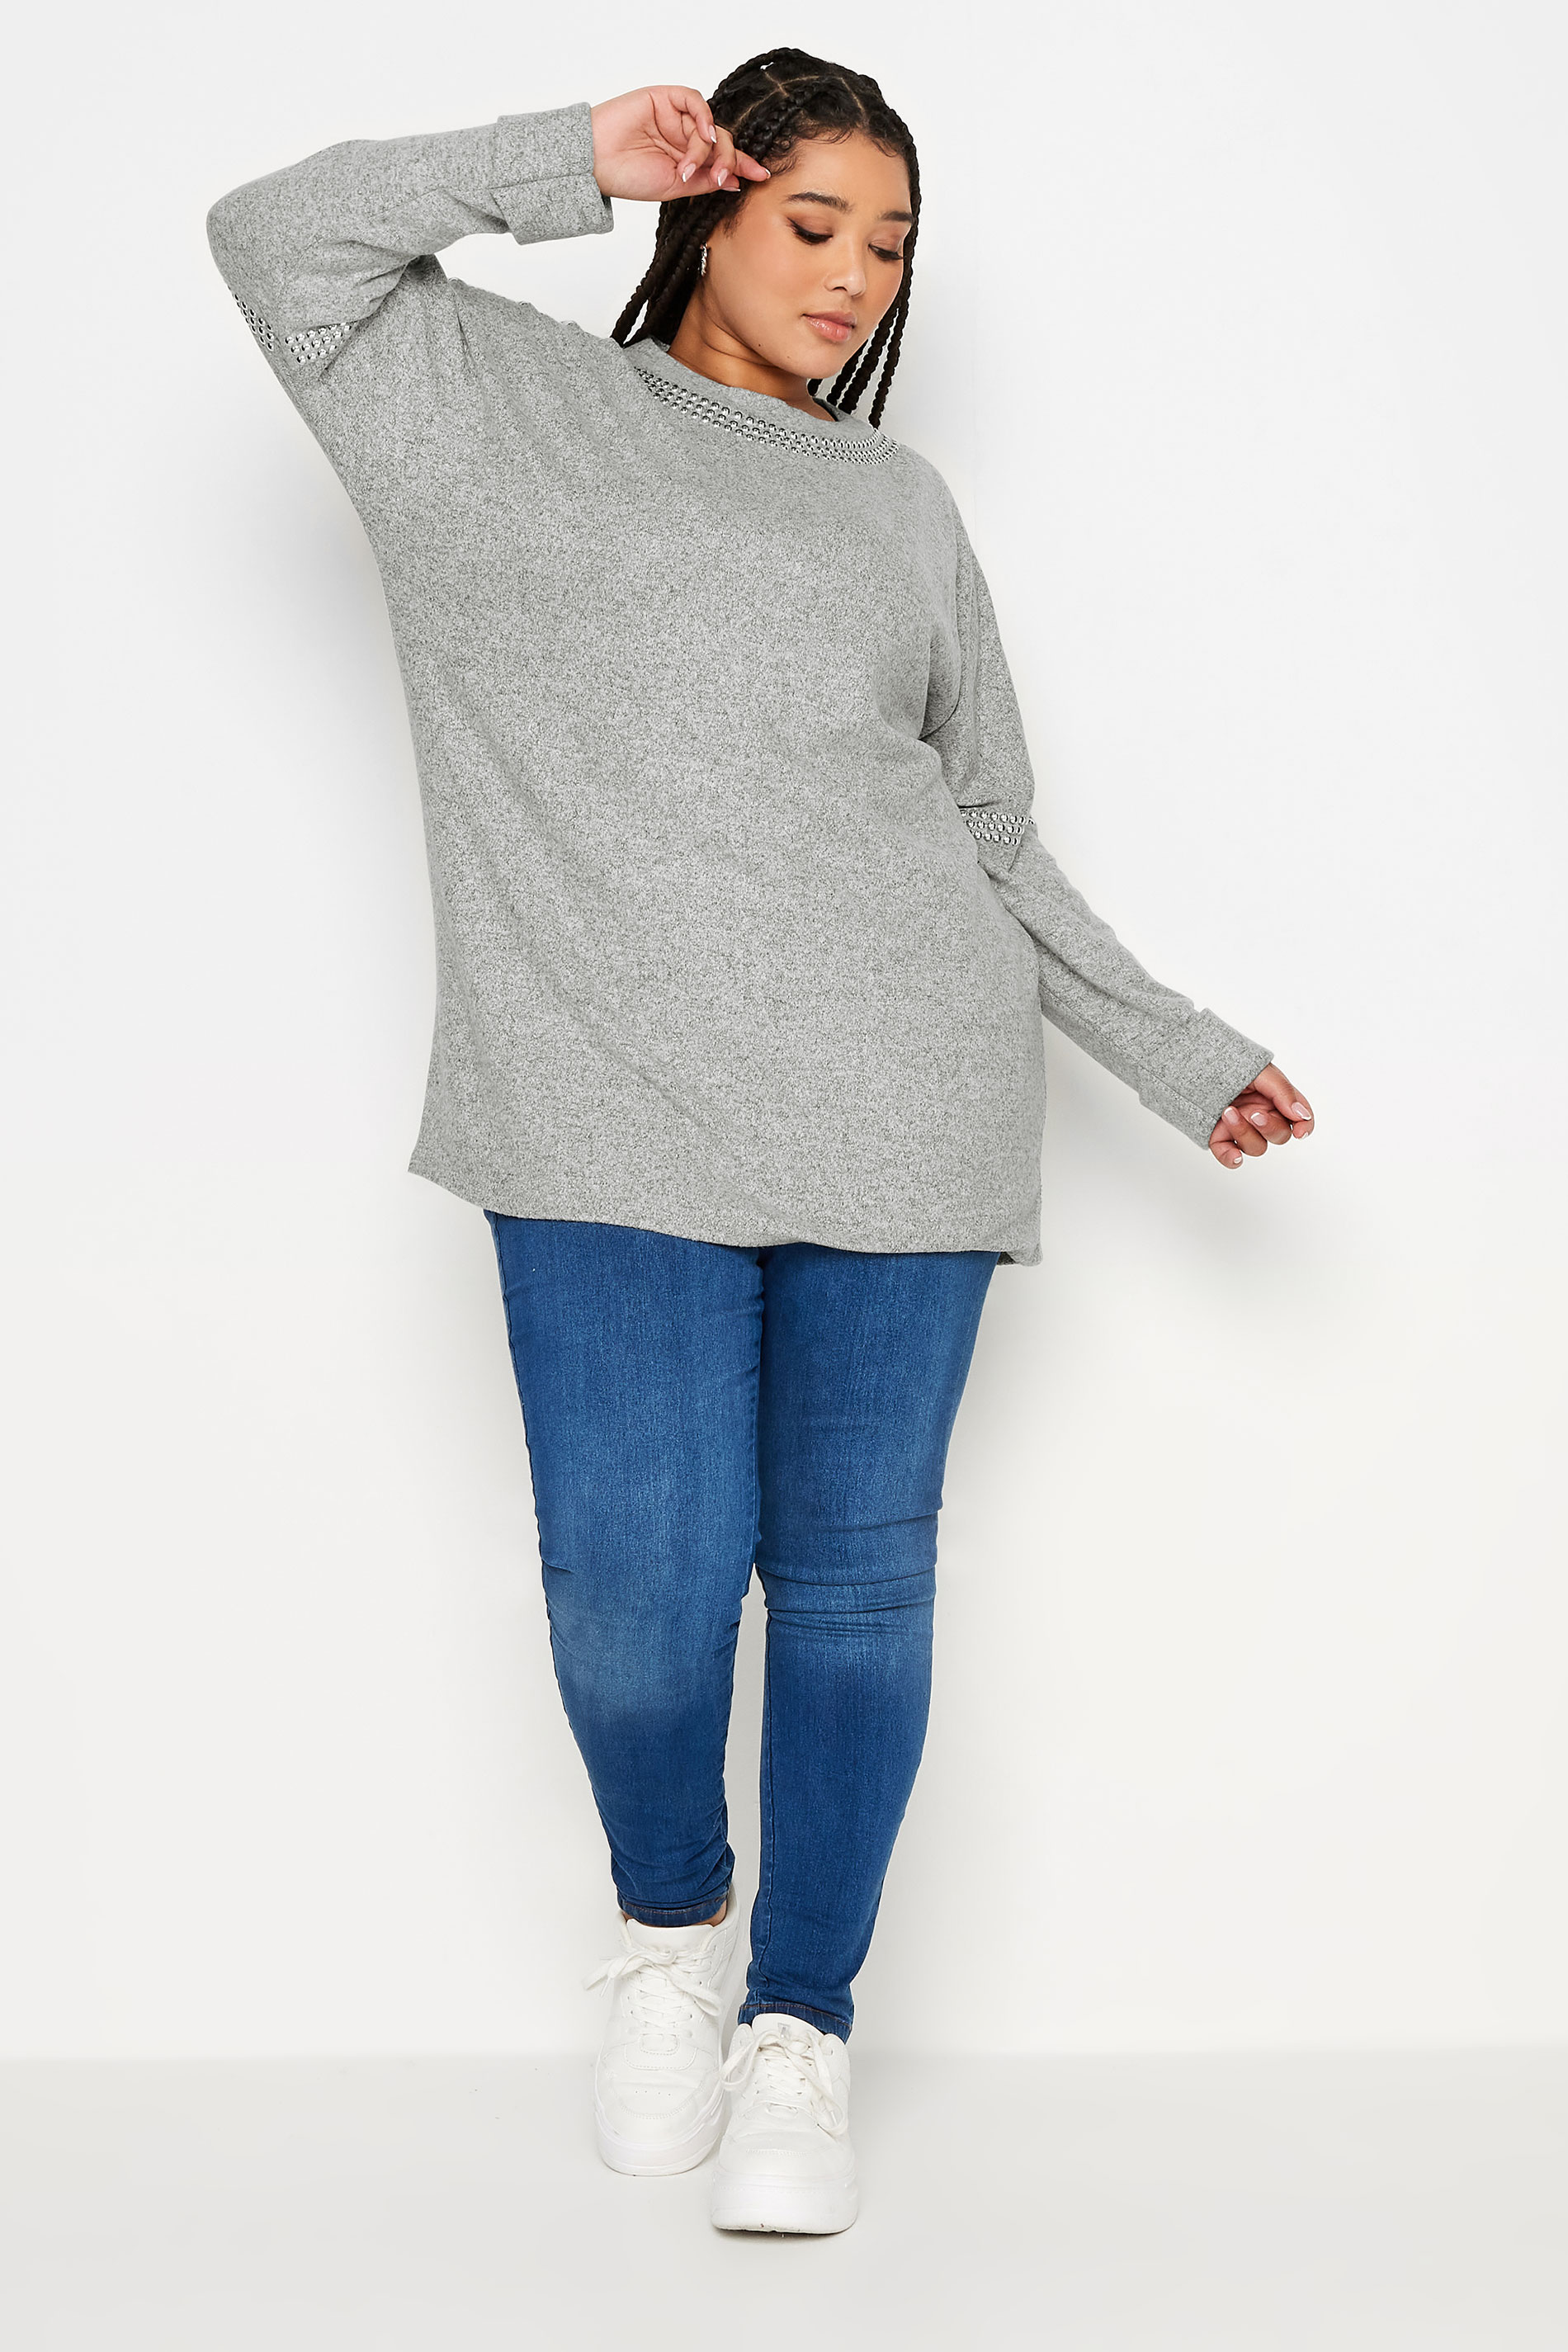 YOURS Plus Size Light Grey Stud Batwing Sleeve Jumper | Yours Clothing 2